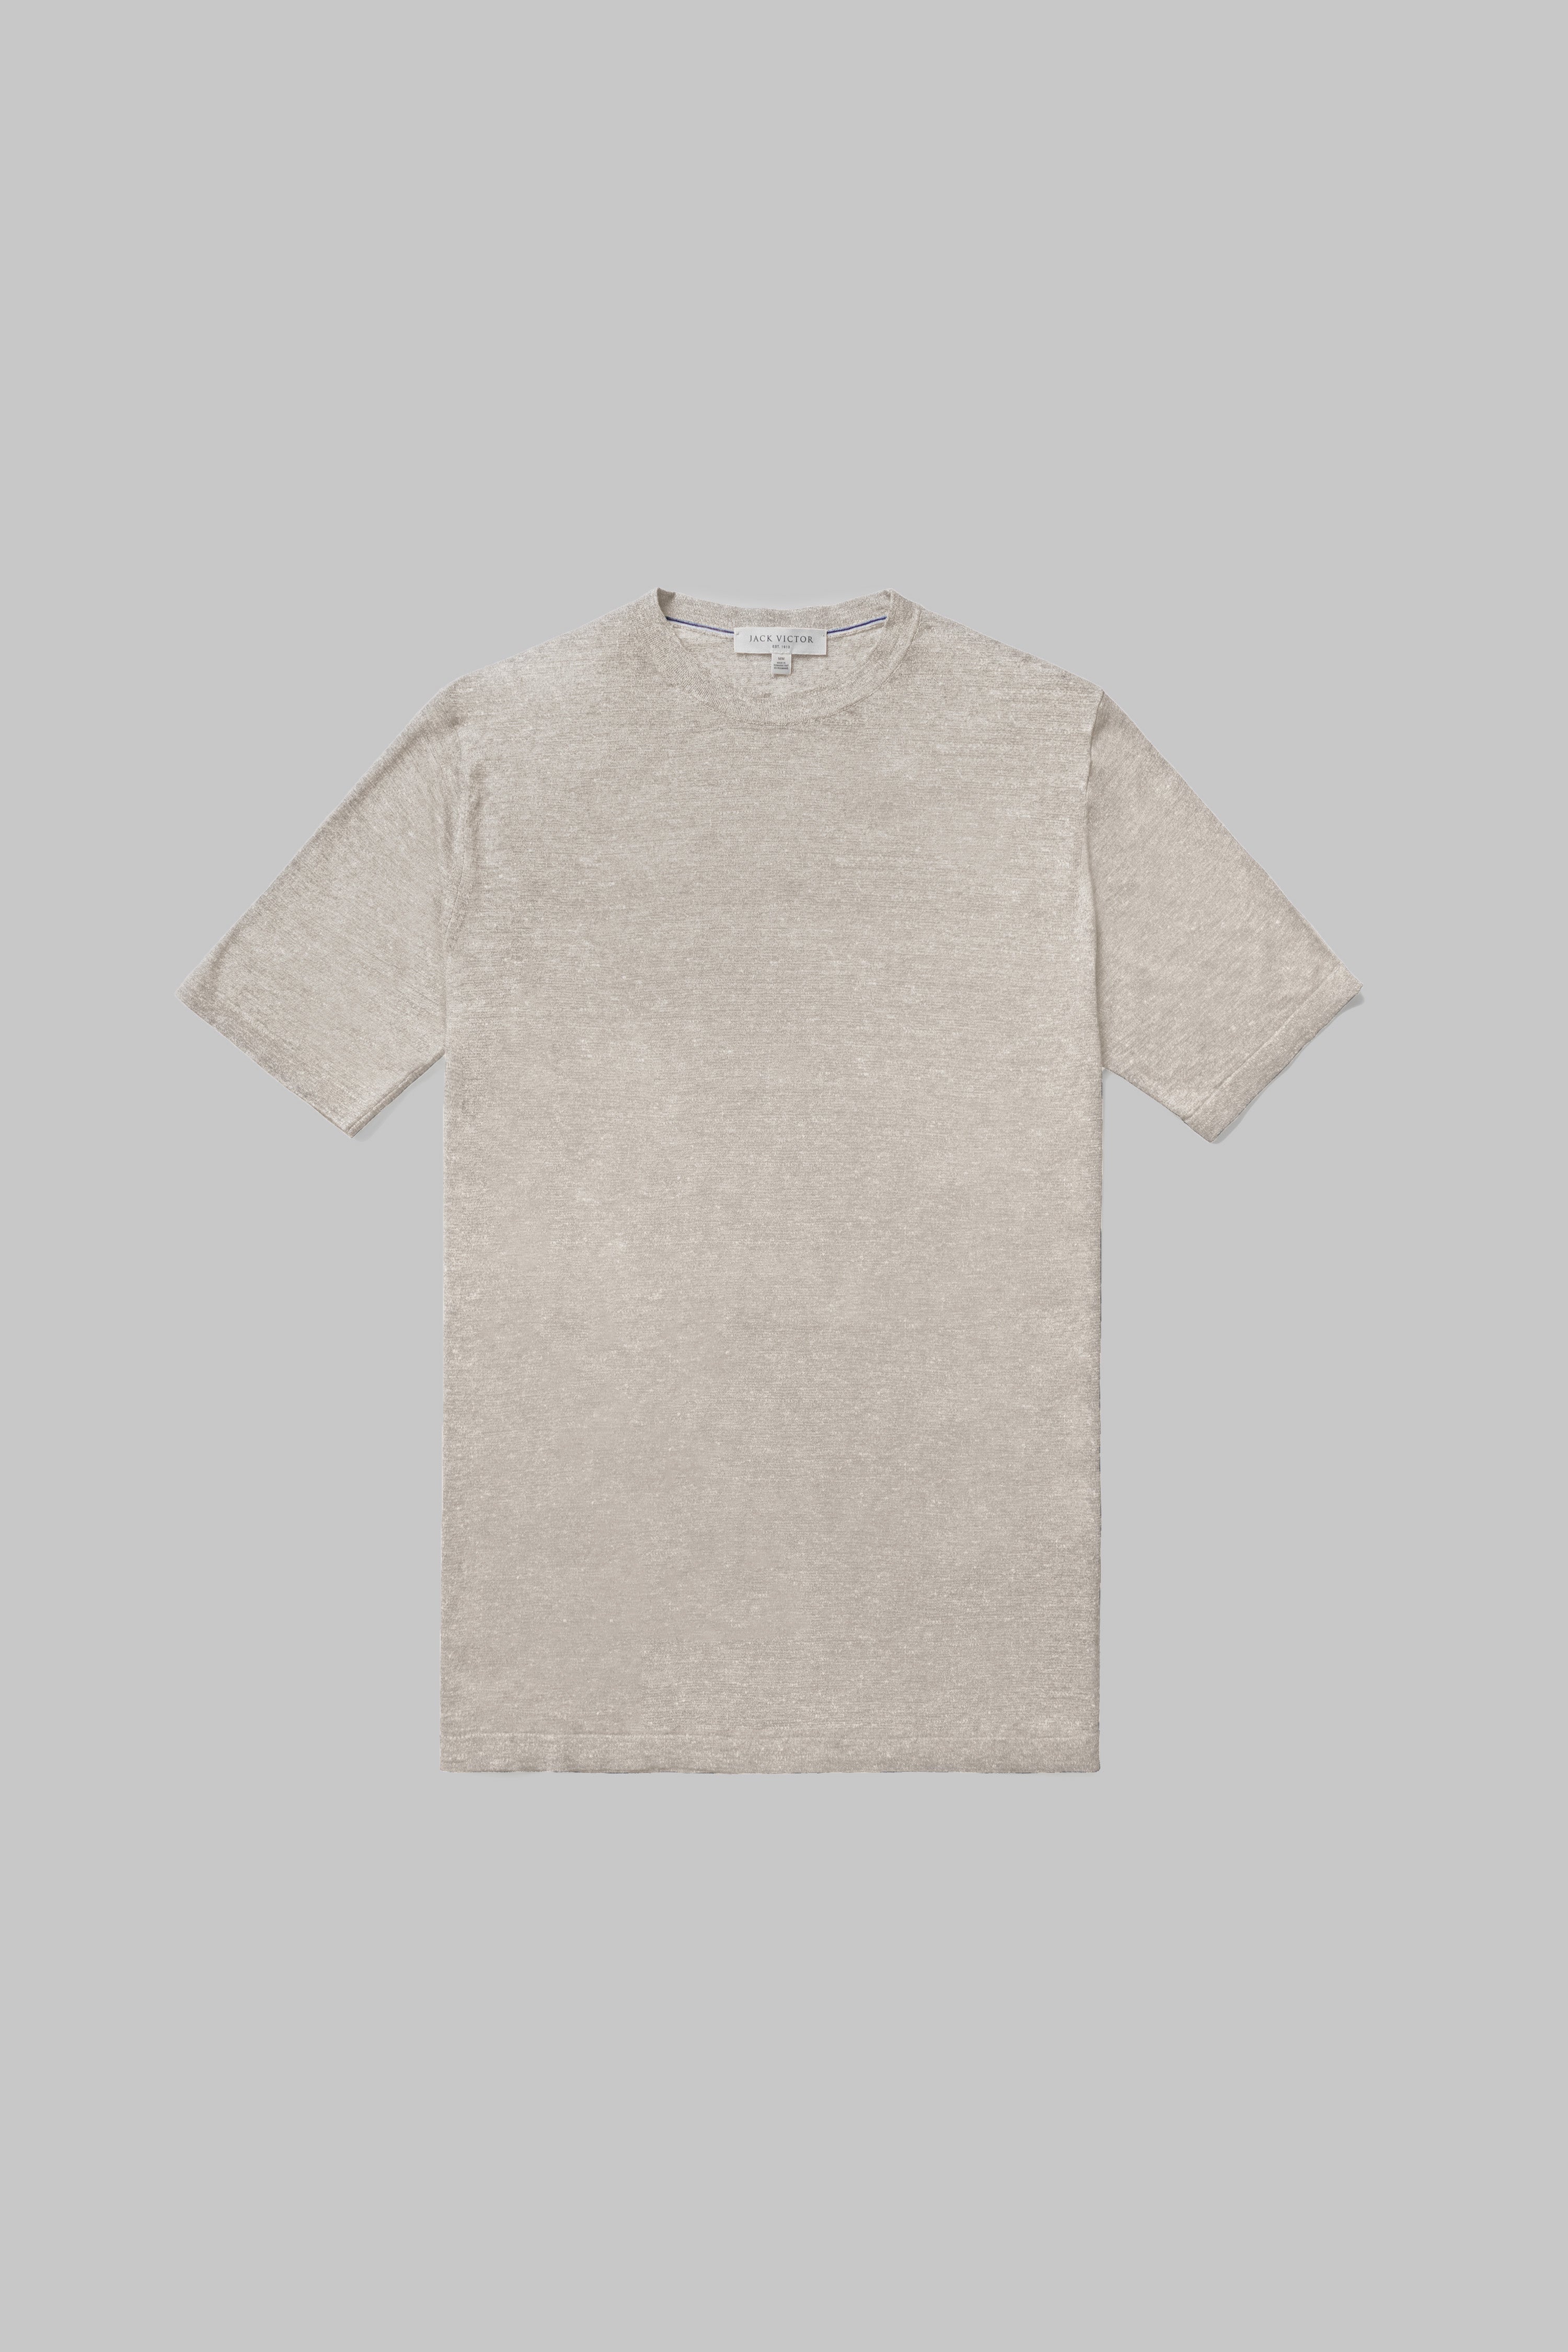 Alt view 6 Westmount Linen and Cotton Knit Crew Neck in Sand